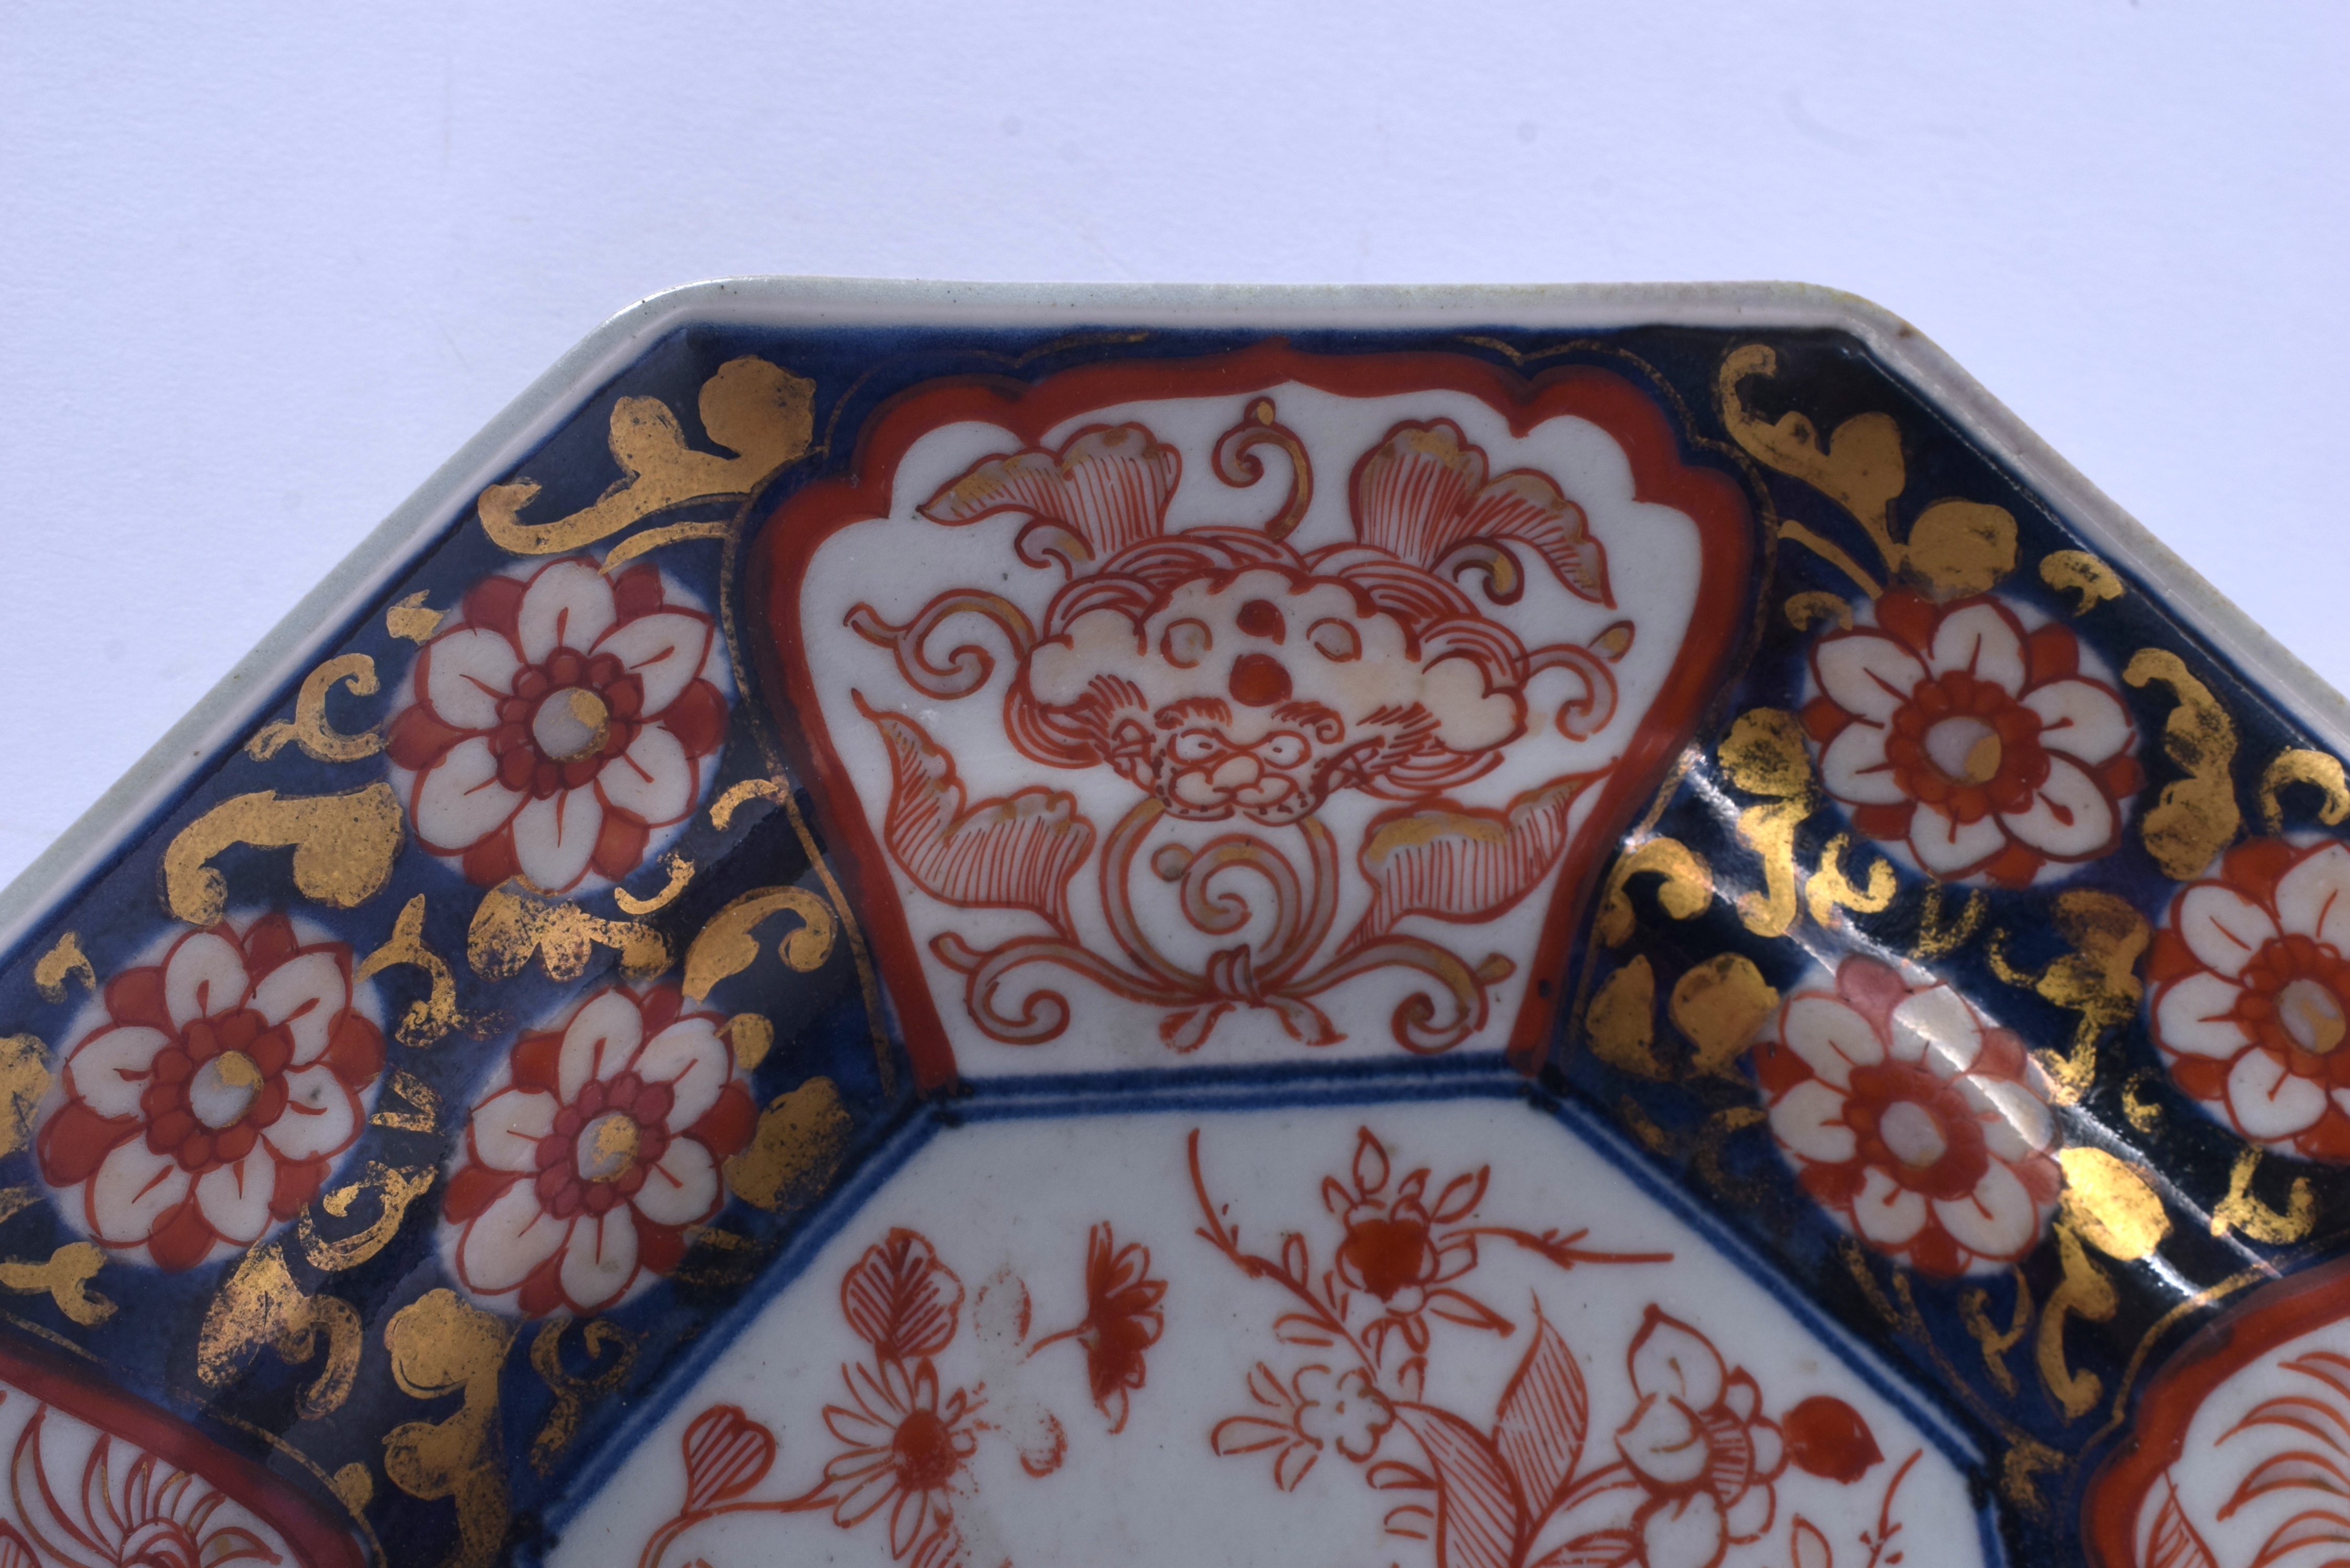 AN 18TH CENTURY JAPANESE EDO PERIOD IMARI OCTAGONAL PORCELAIN DISH painted with floral sprays. 21 cm - Image 3 of 5